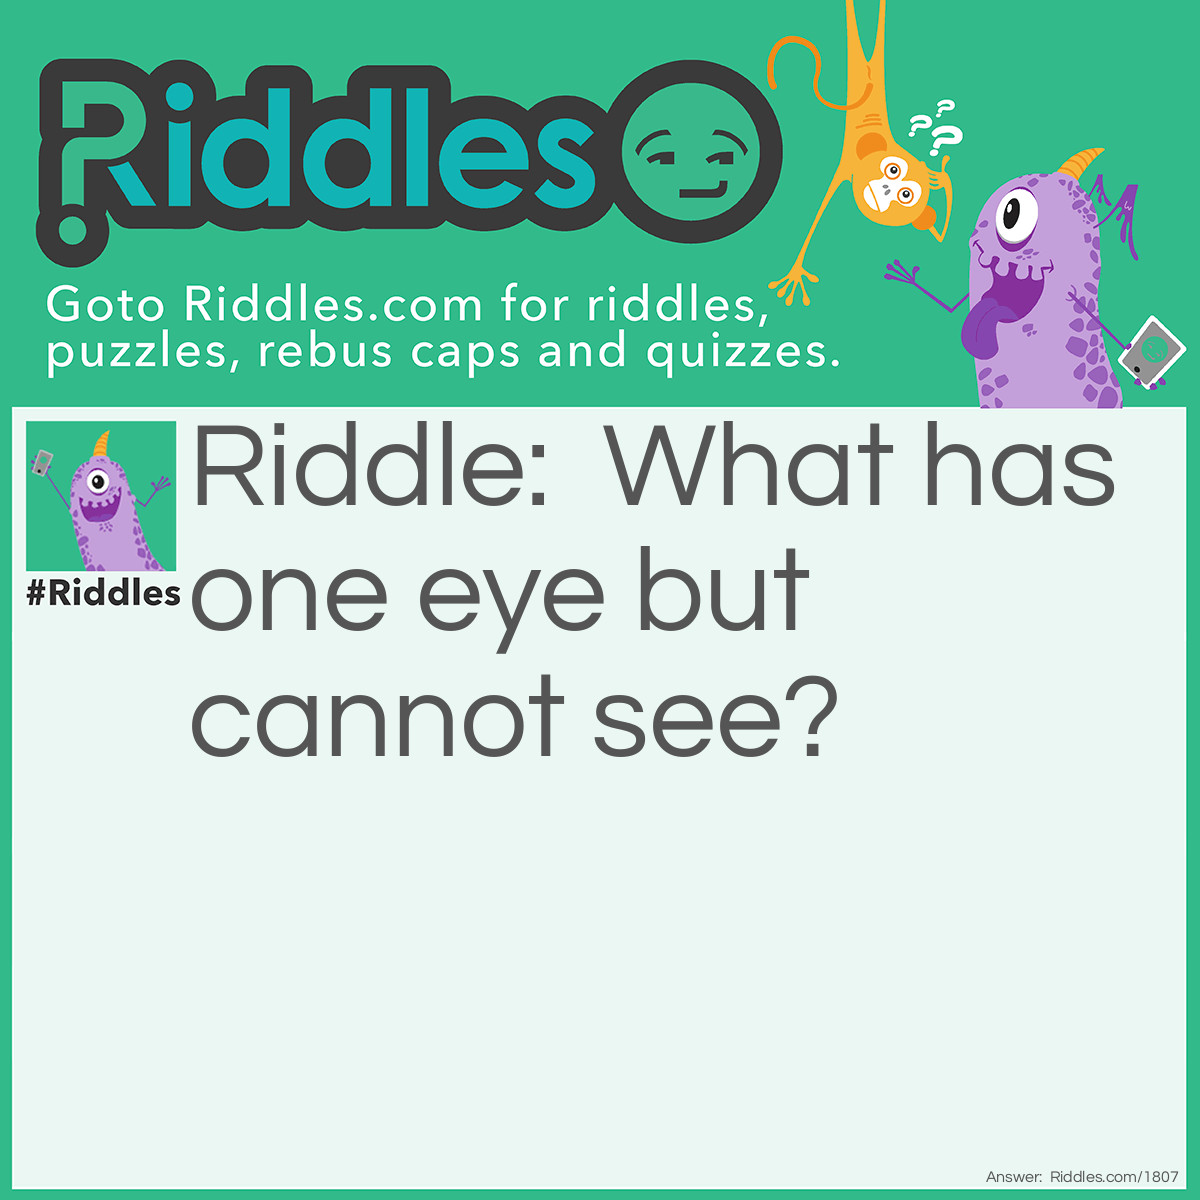 Riddle: What has one eye but cannot see? Answer: A needle.